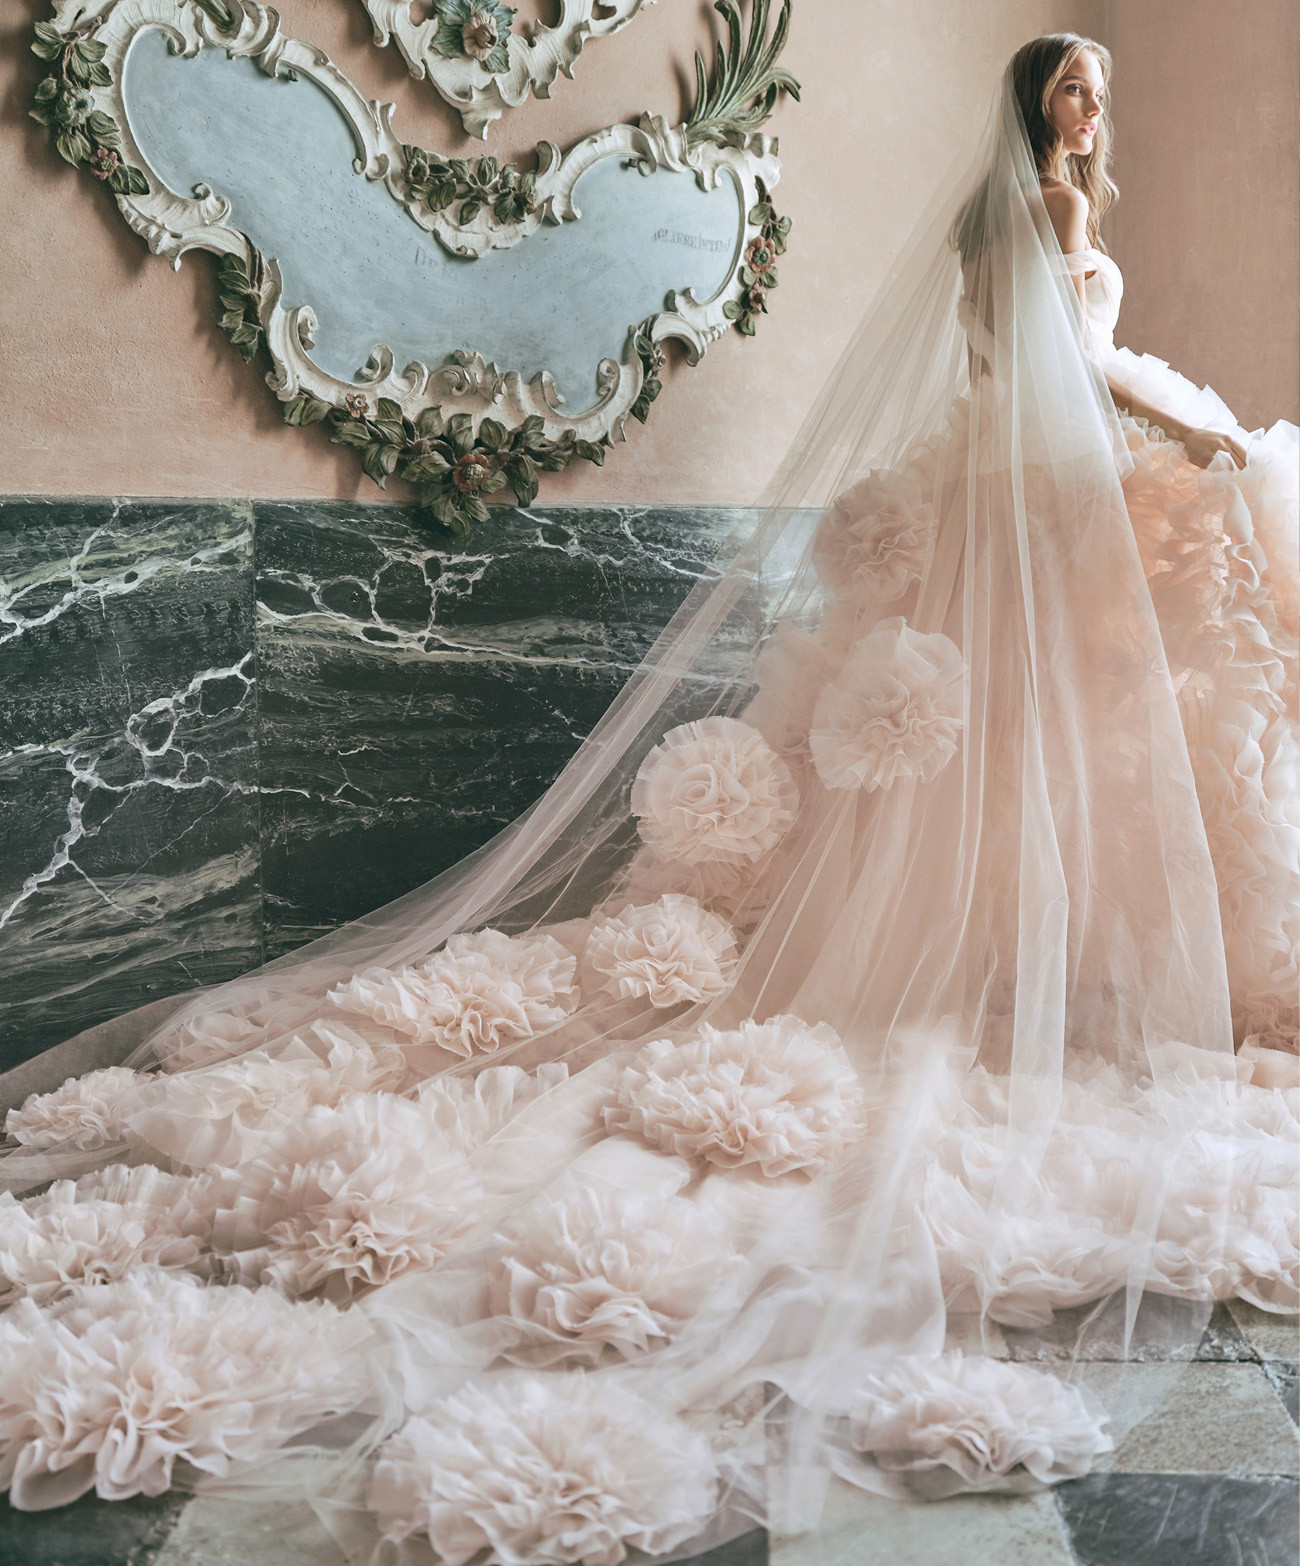 Blush Wedding Gowns 2020
 Our Favorite 2020 Wedding Dress Trends from NY Bridal